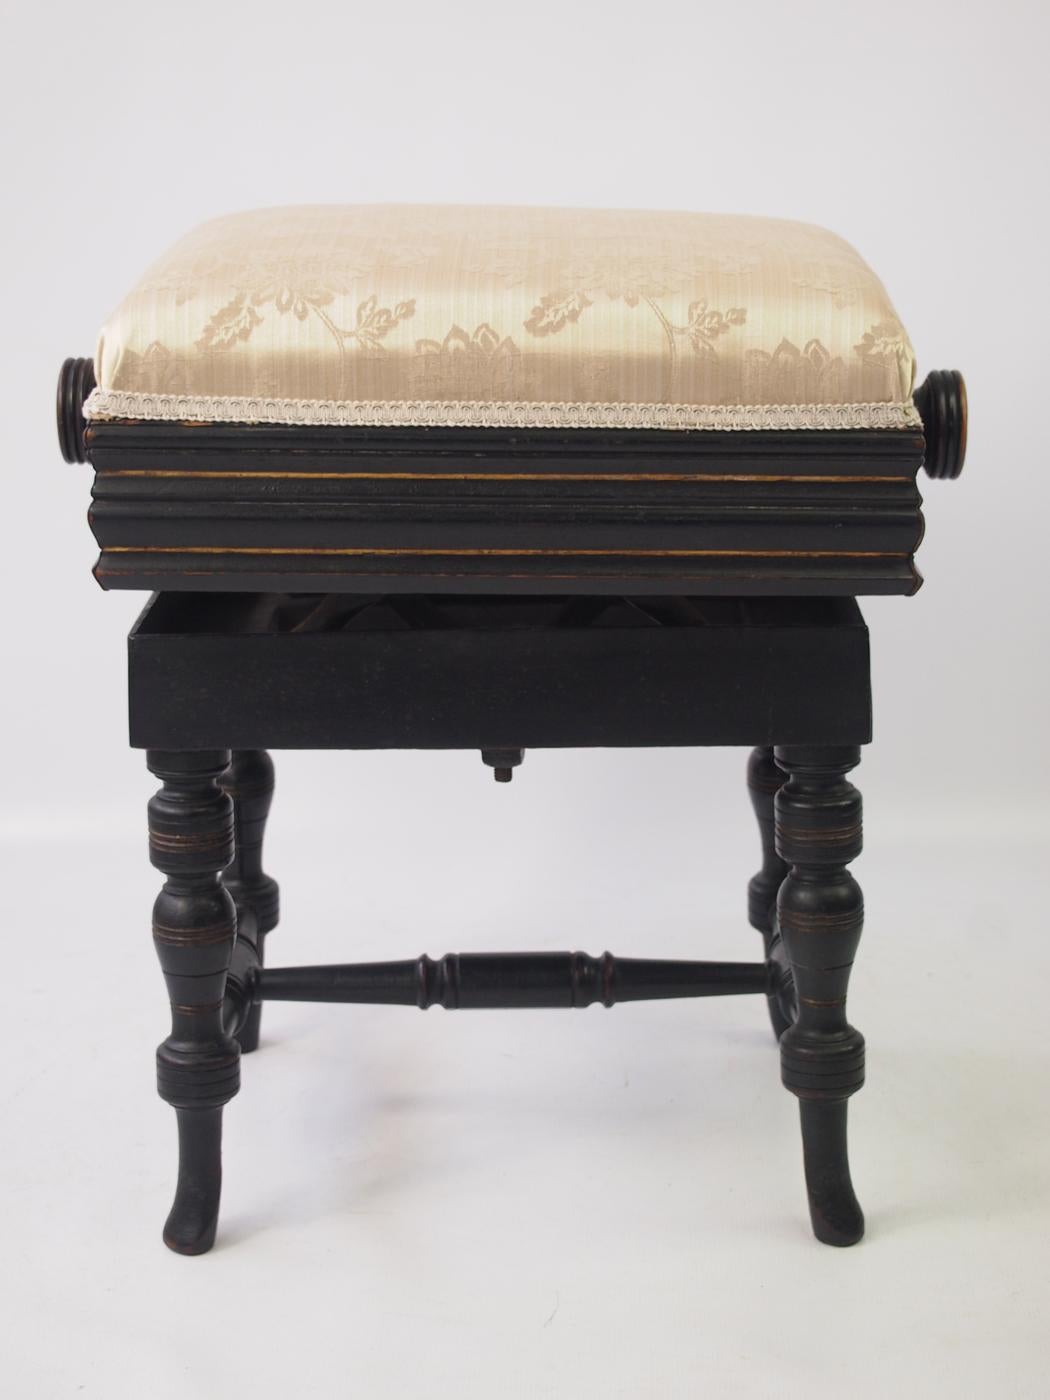 Aesthetic Movement Antique English Victorian Aesthetic Rise and Fall Piano Stool Music Seat Bench For Sale